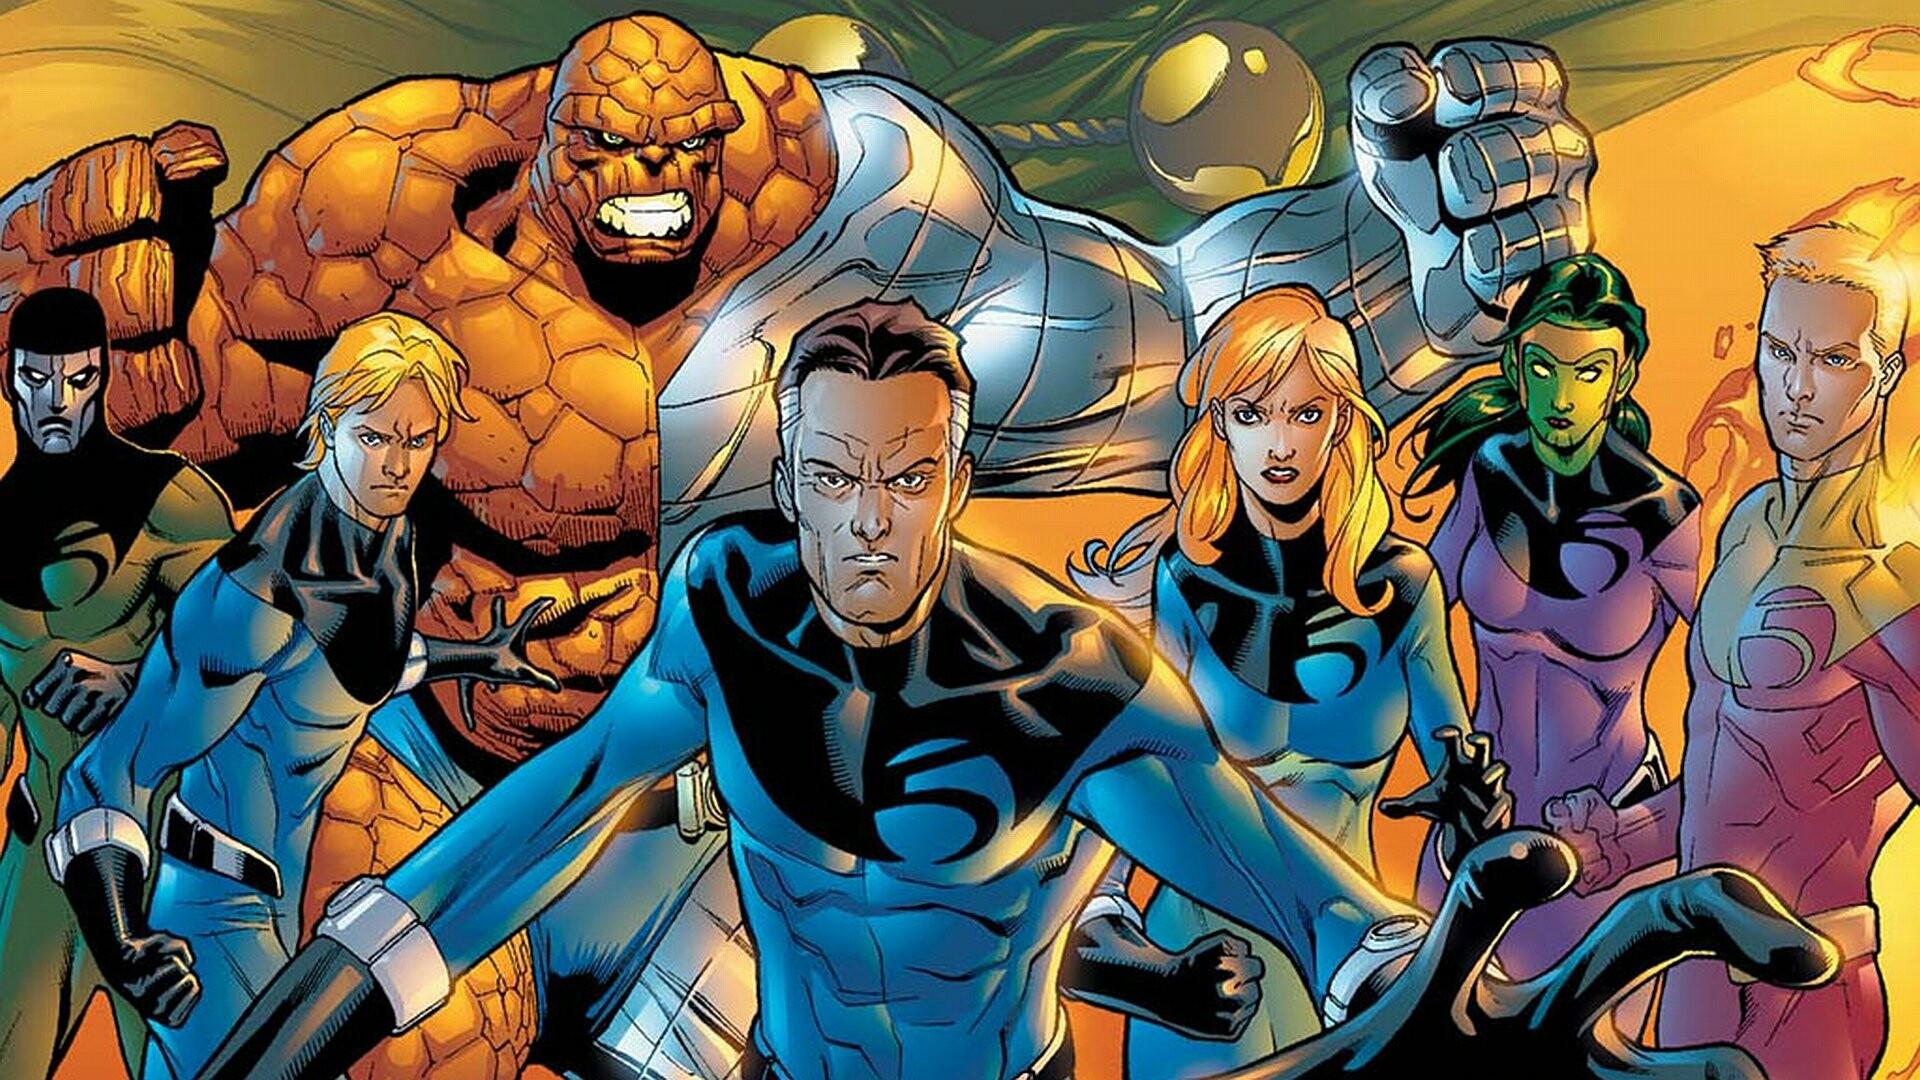 Fantastic 4: The Thing, the Human Torch, the Invisible Woman and Mister Fantastic, Comic book characters. 1920x1080 Full HD Background.